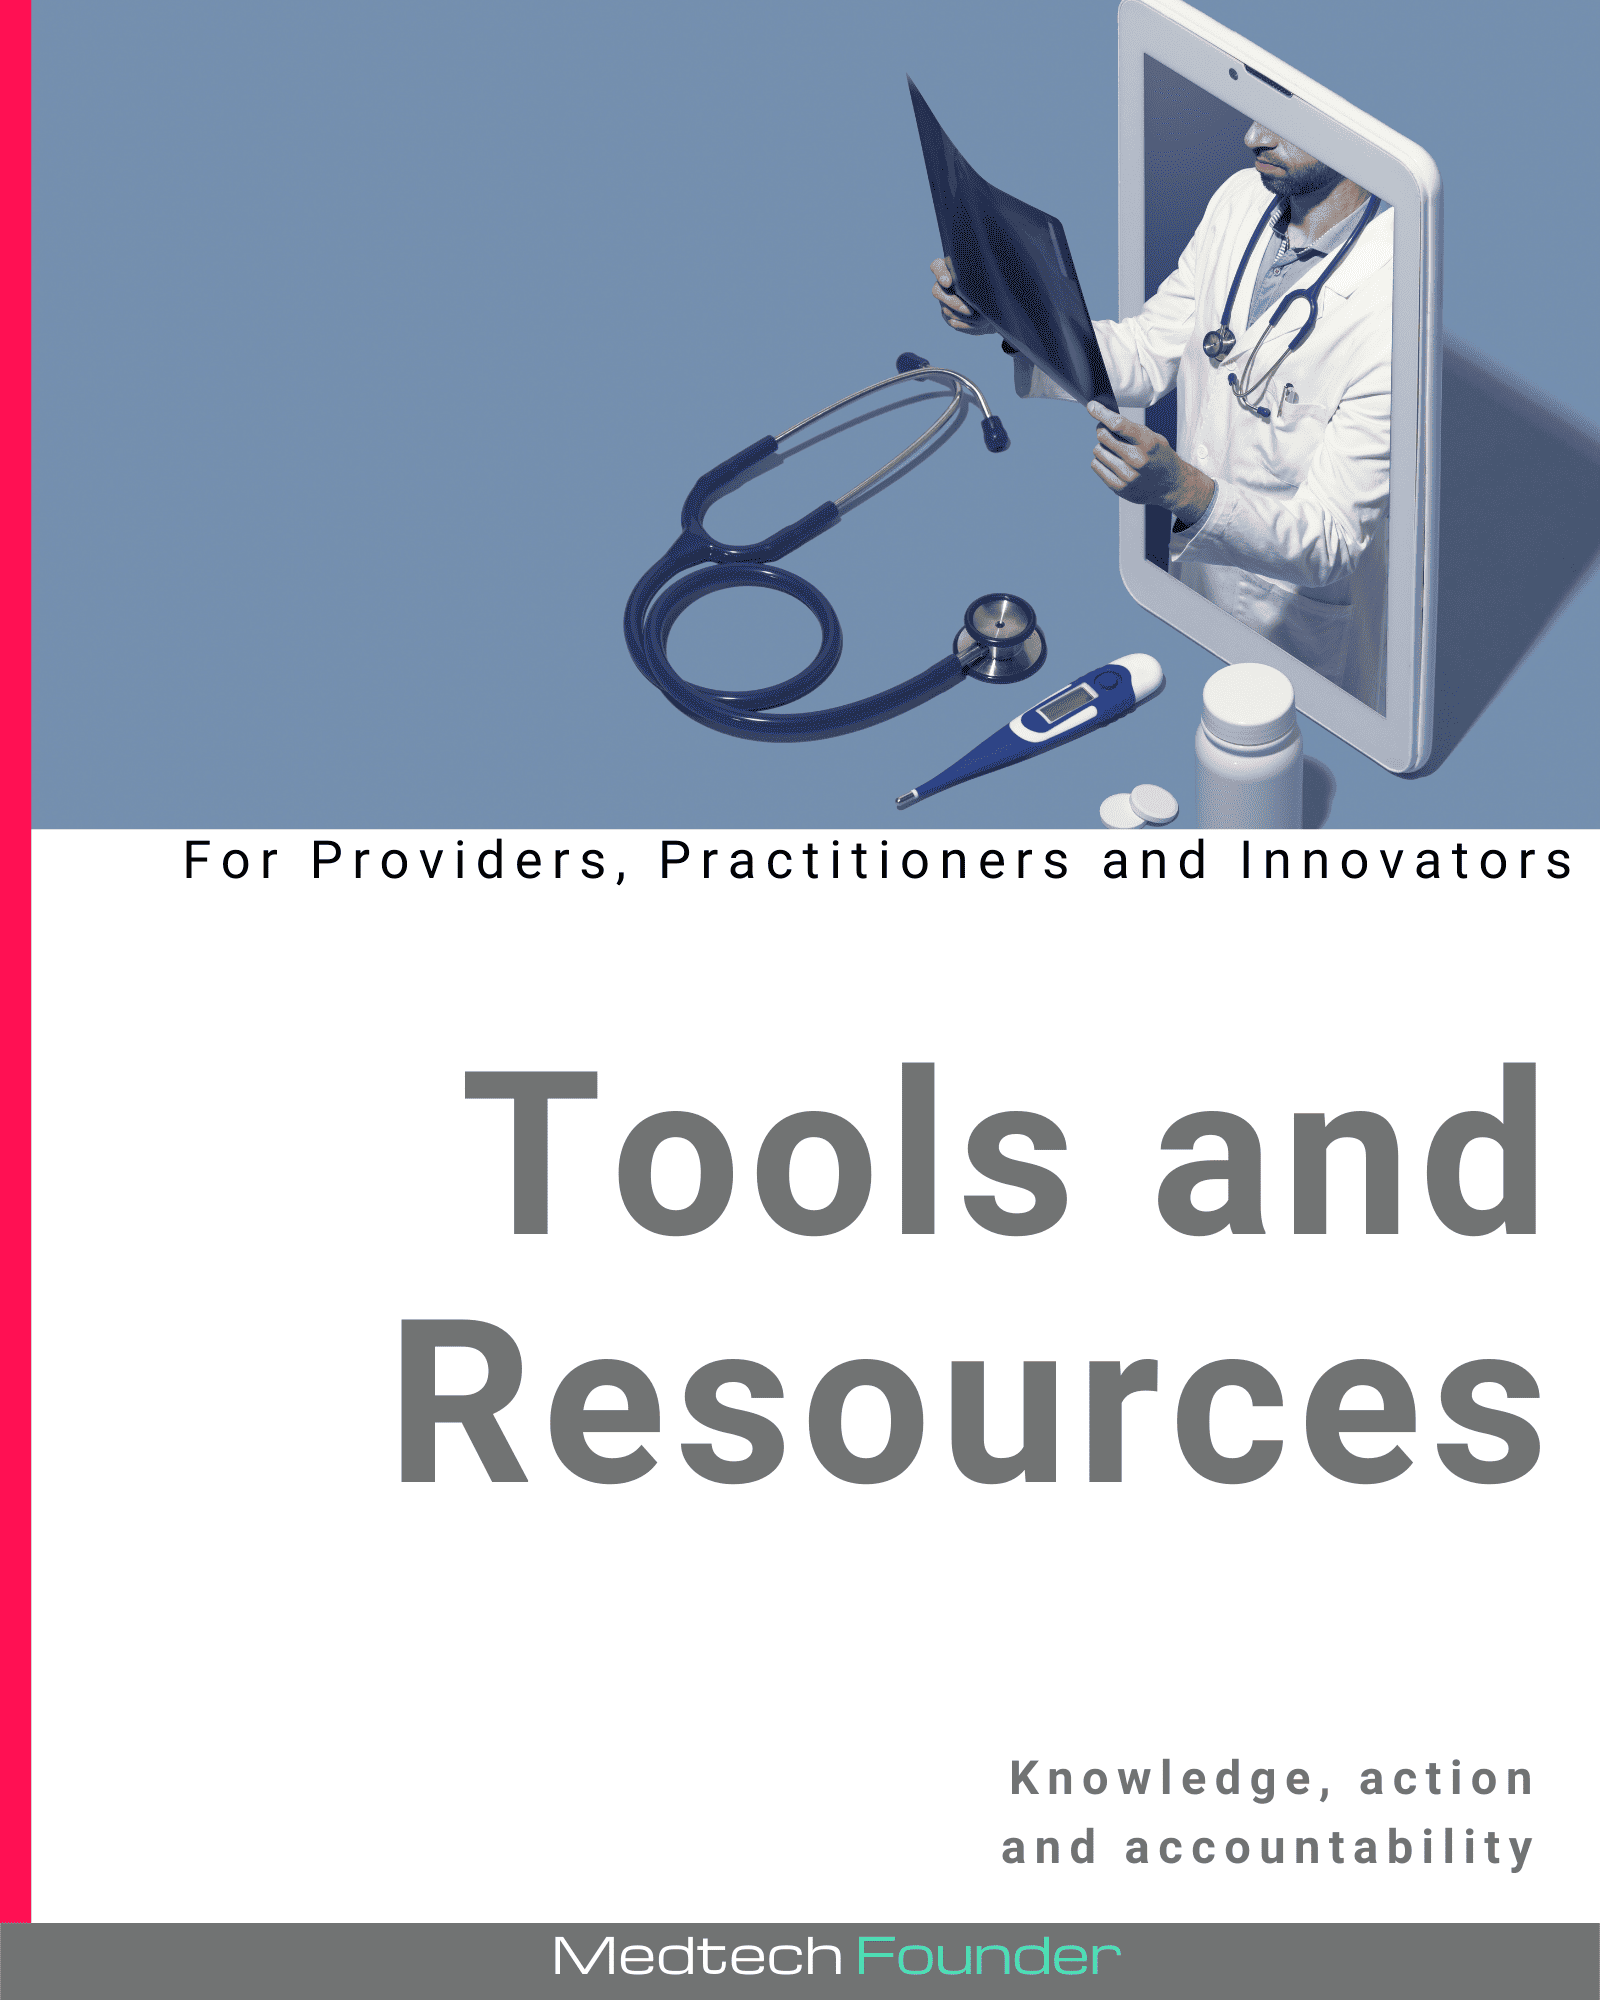 Tools and Resources by Medtech Founder